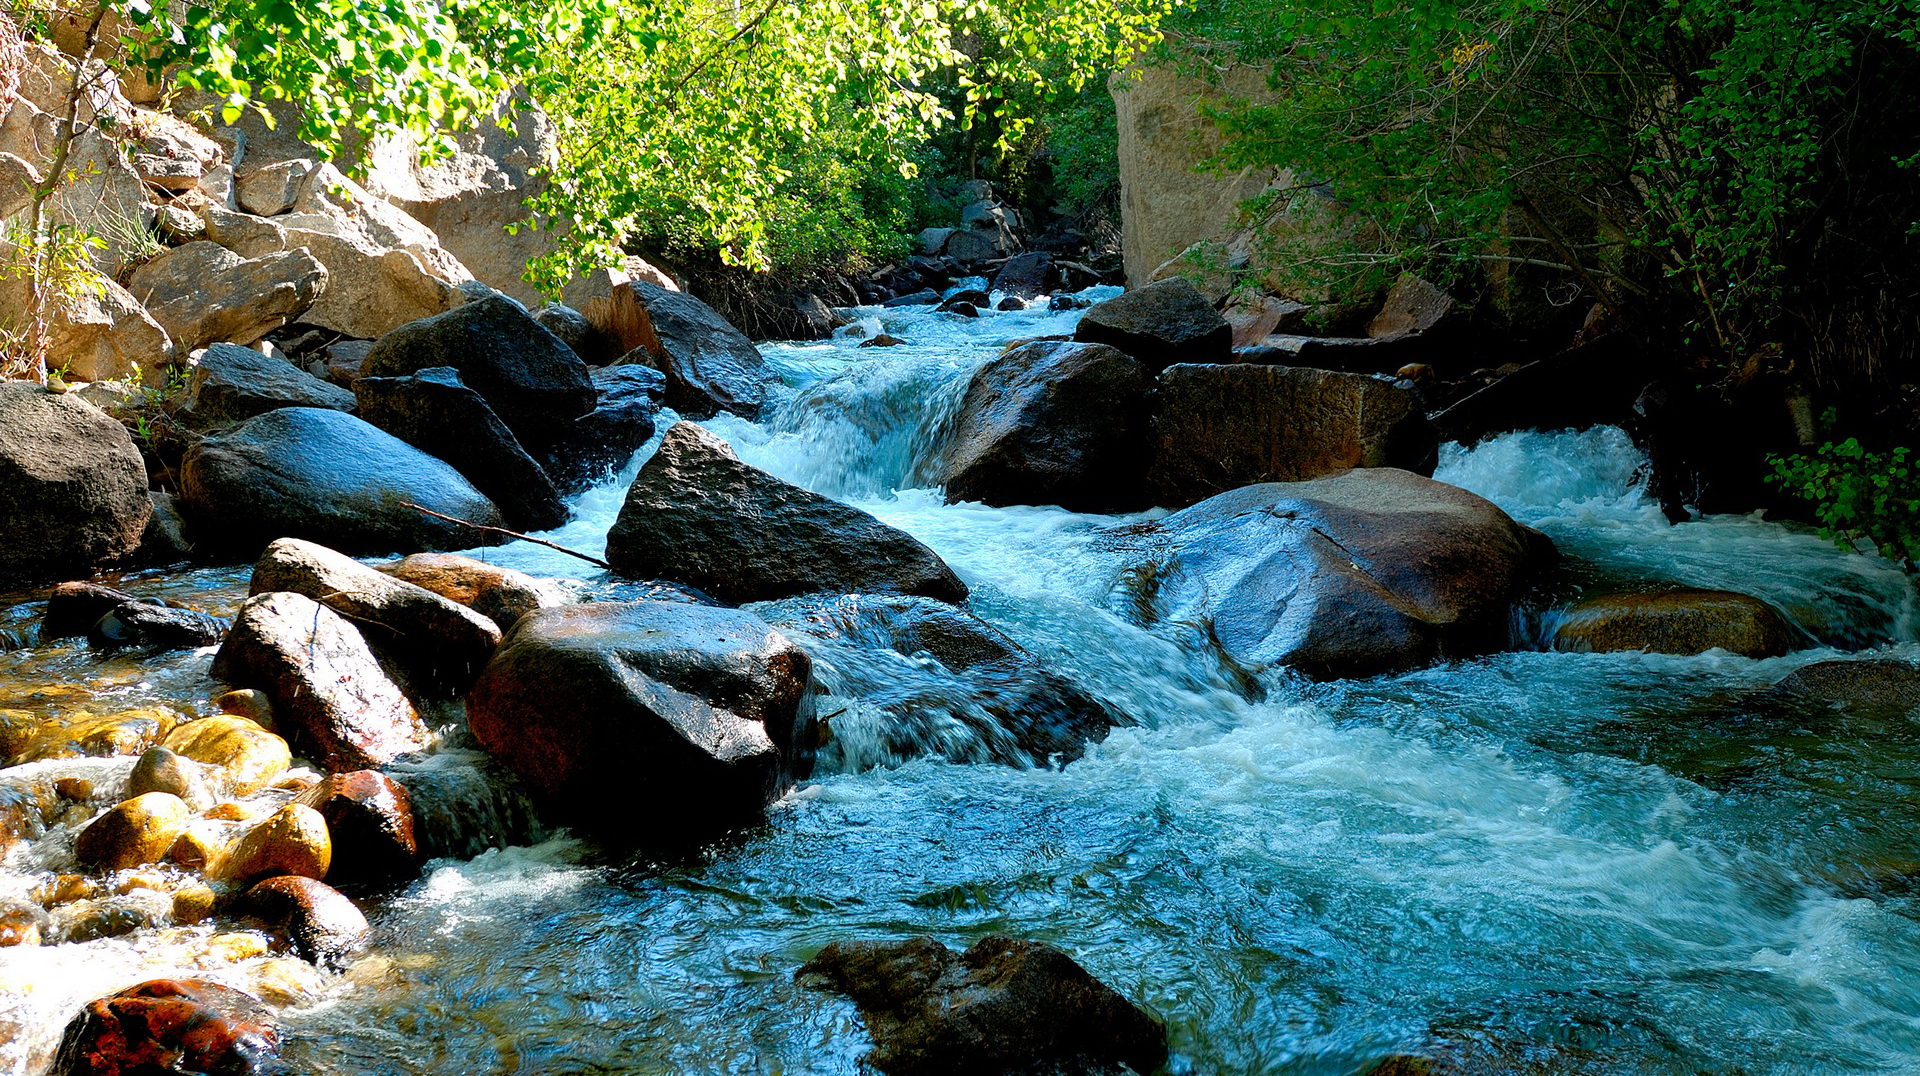 nature images - River in Rapid Flow, Big Stones in the Middle, Brushed Quite Clean 1920X1080 free wallpaper download